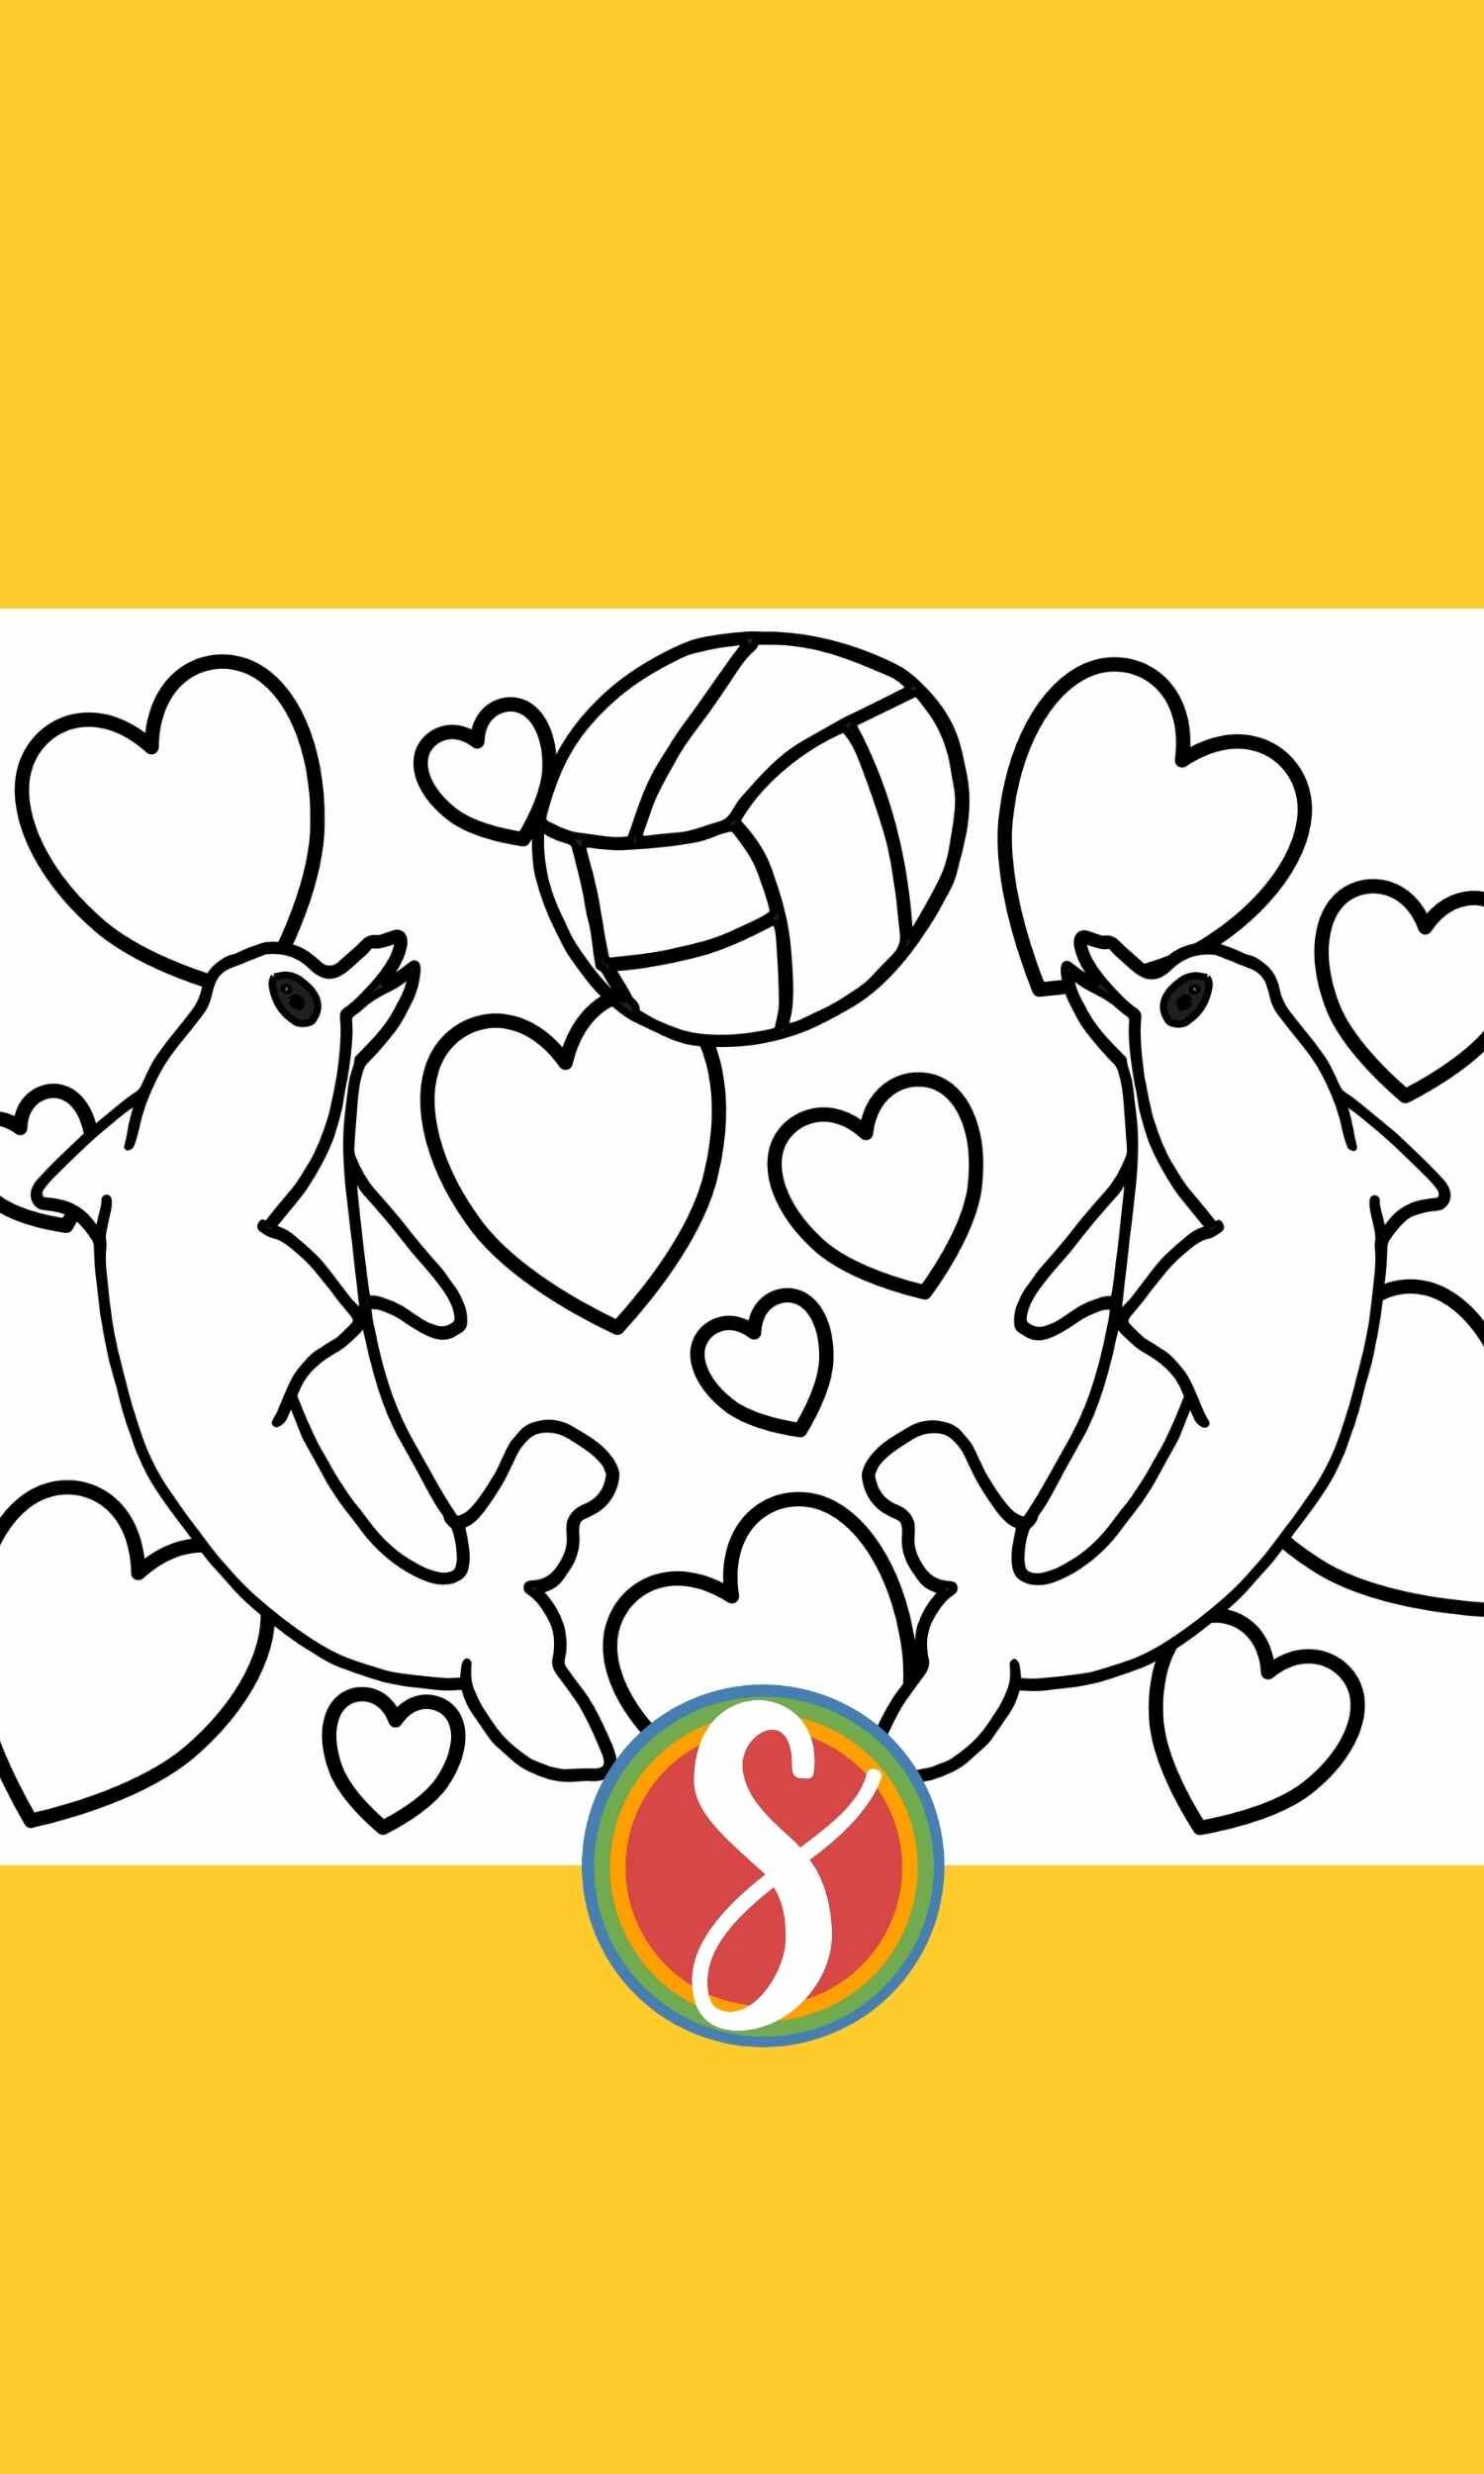 Free dolphin coloring page - dolphin friends to color with a background of hearts + 10 more free dolphin sheets to color for kids and adults from Stevie Doodles